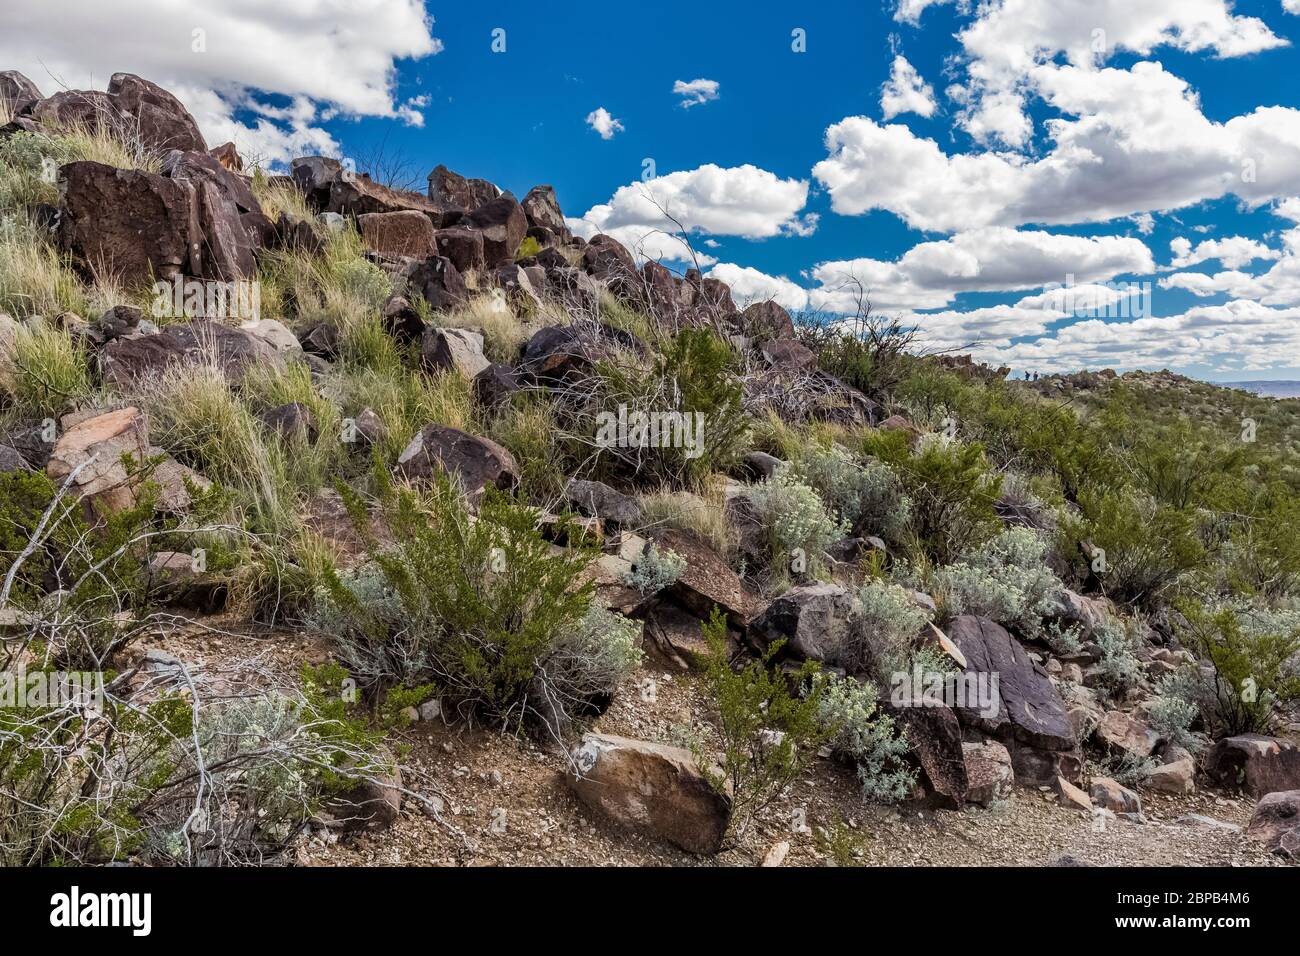 Typical landscape with rocks and brush at Three Rivers Petroglyph Site in the northern Chihuahuan Desert, New Mexico, USA Stock Photo